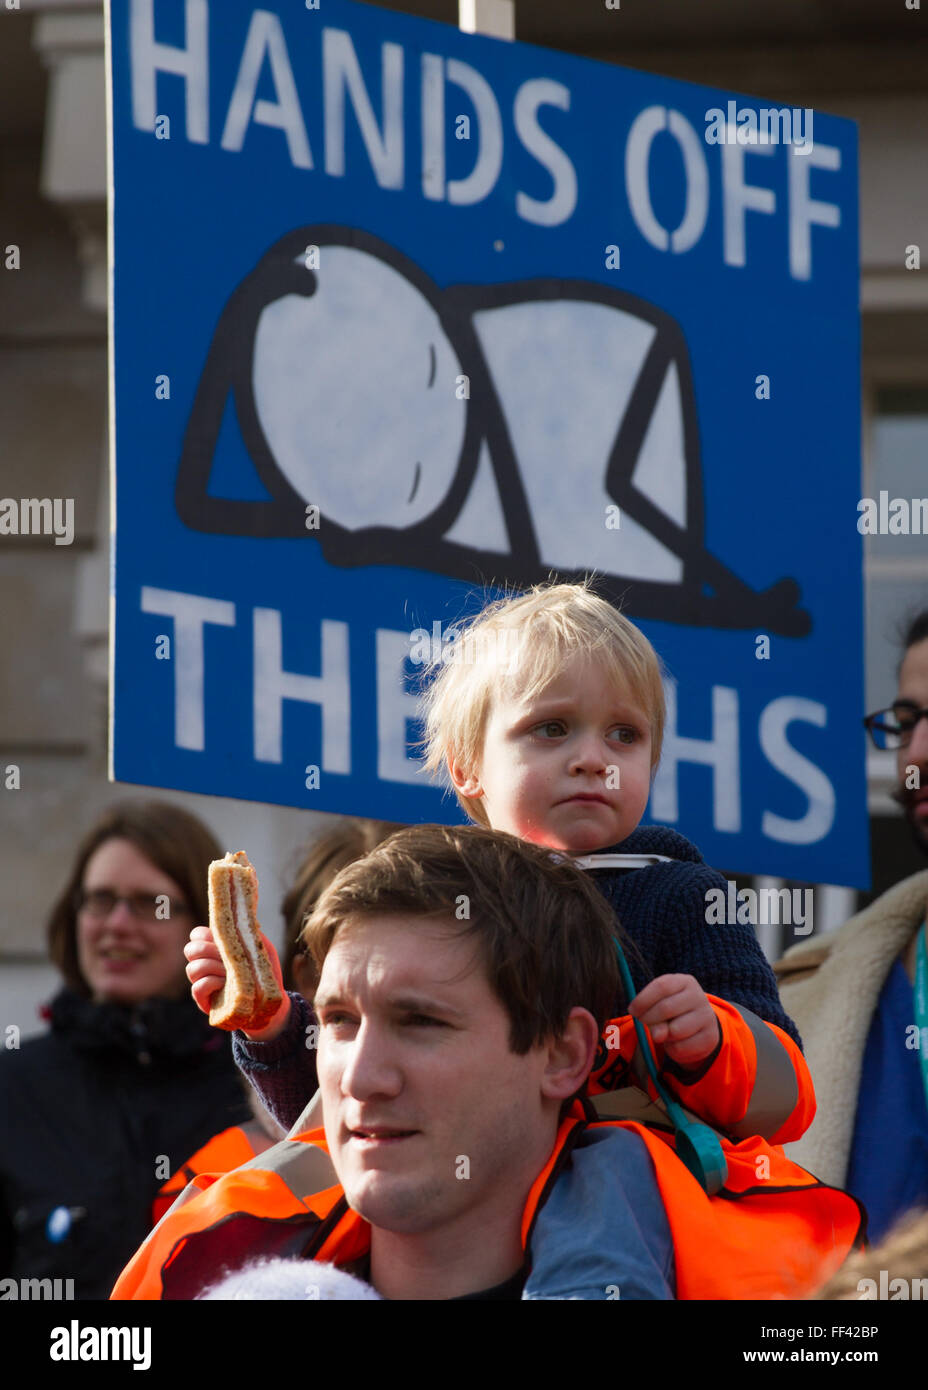 London, UK. 10th February, 2016. Protest outside Hackney Town Hall.  copyright Carol Moir/Alamy Live News. Banner showing design by Stik London. Stock Photo